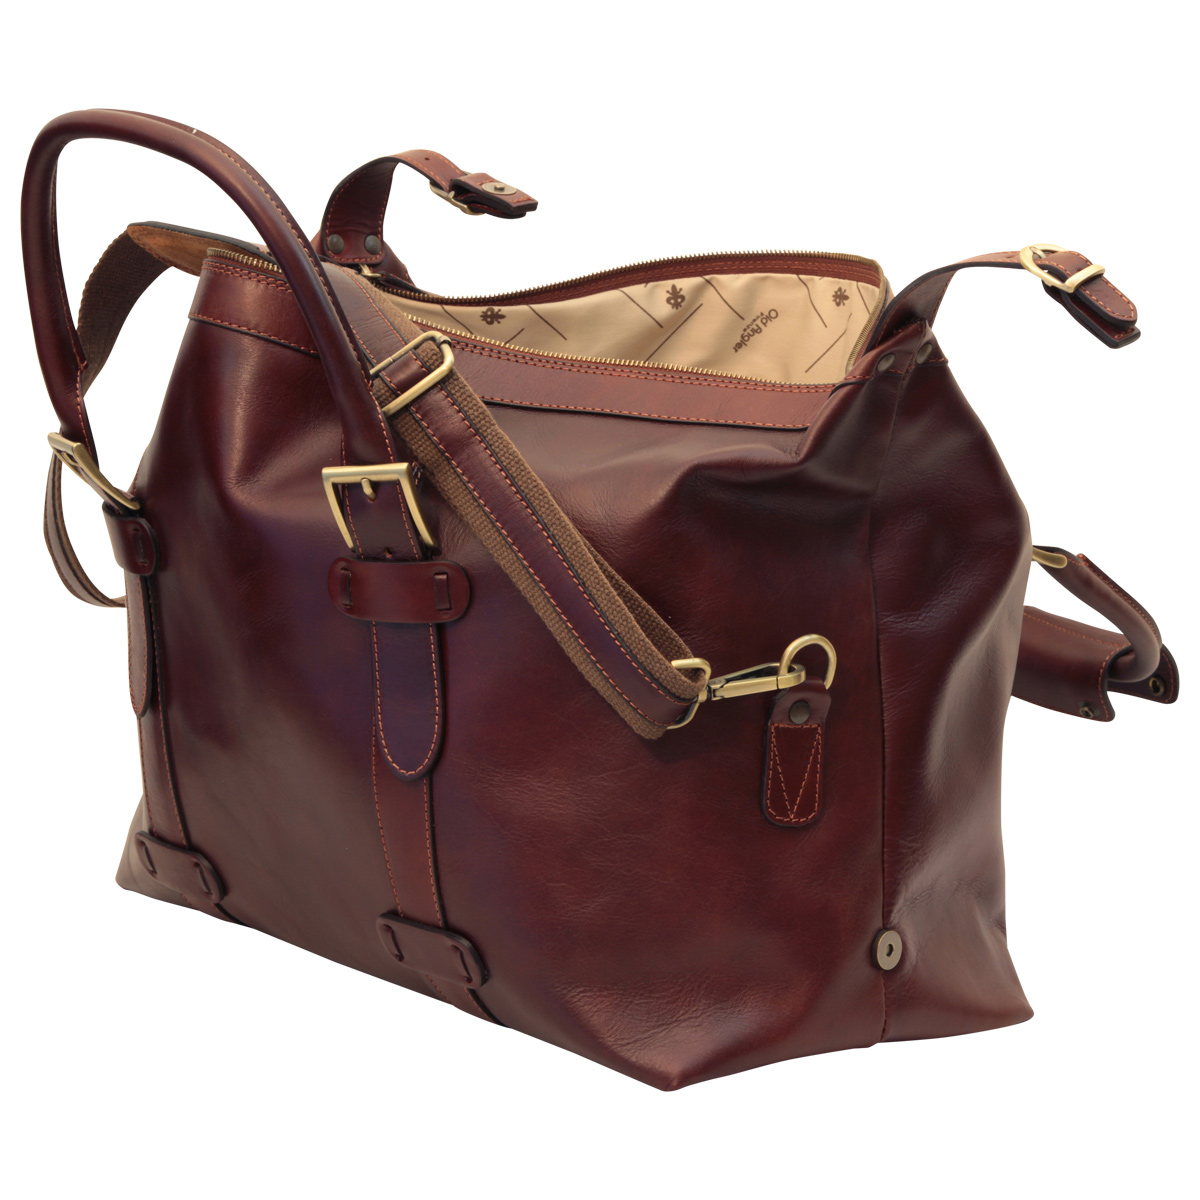 Cowhide leather Travel Bag - Brown  | 410689MA | EURO | Old Angler Firenze